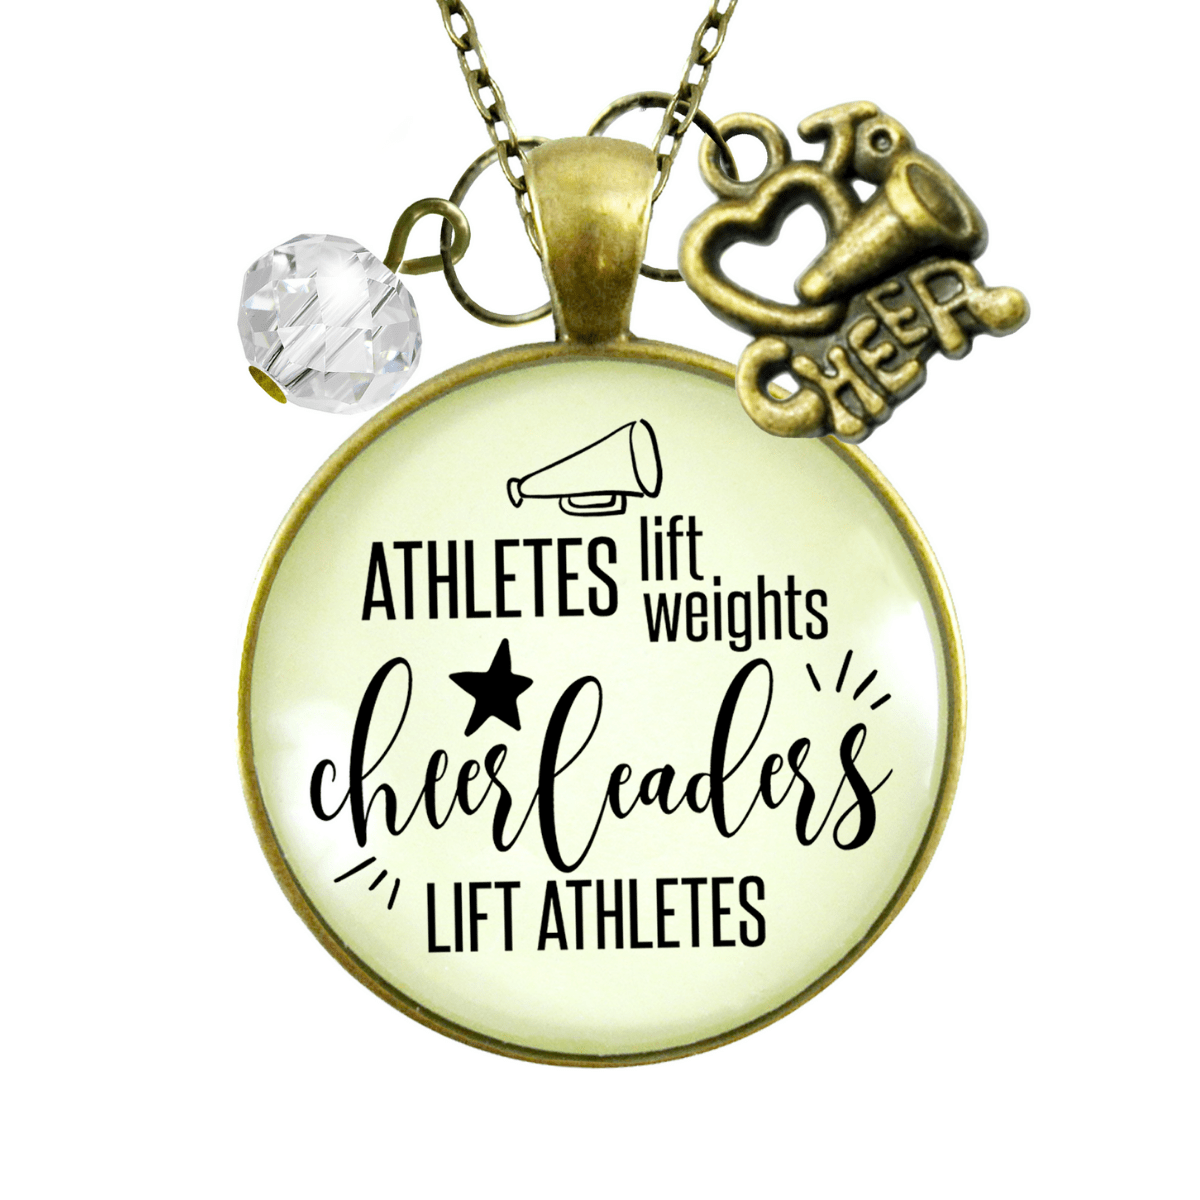 Cheer Necklace Athletes Lift Weights Funny Cheerleader Jewelry Megaphone Charm - Gutsy Goodness